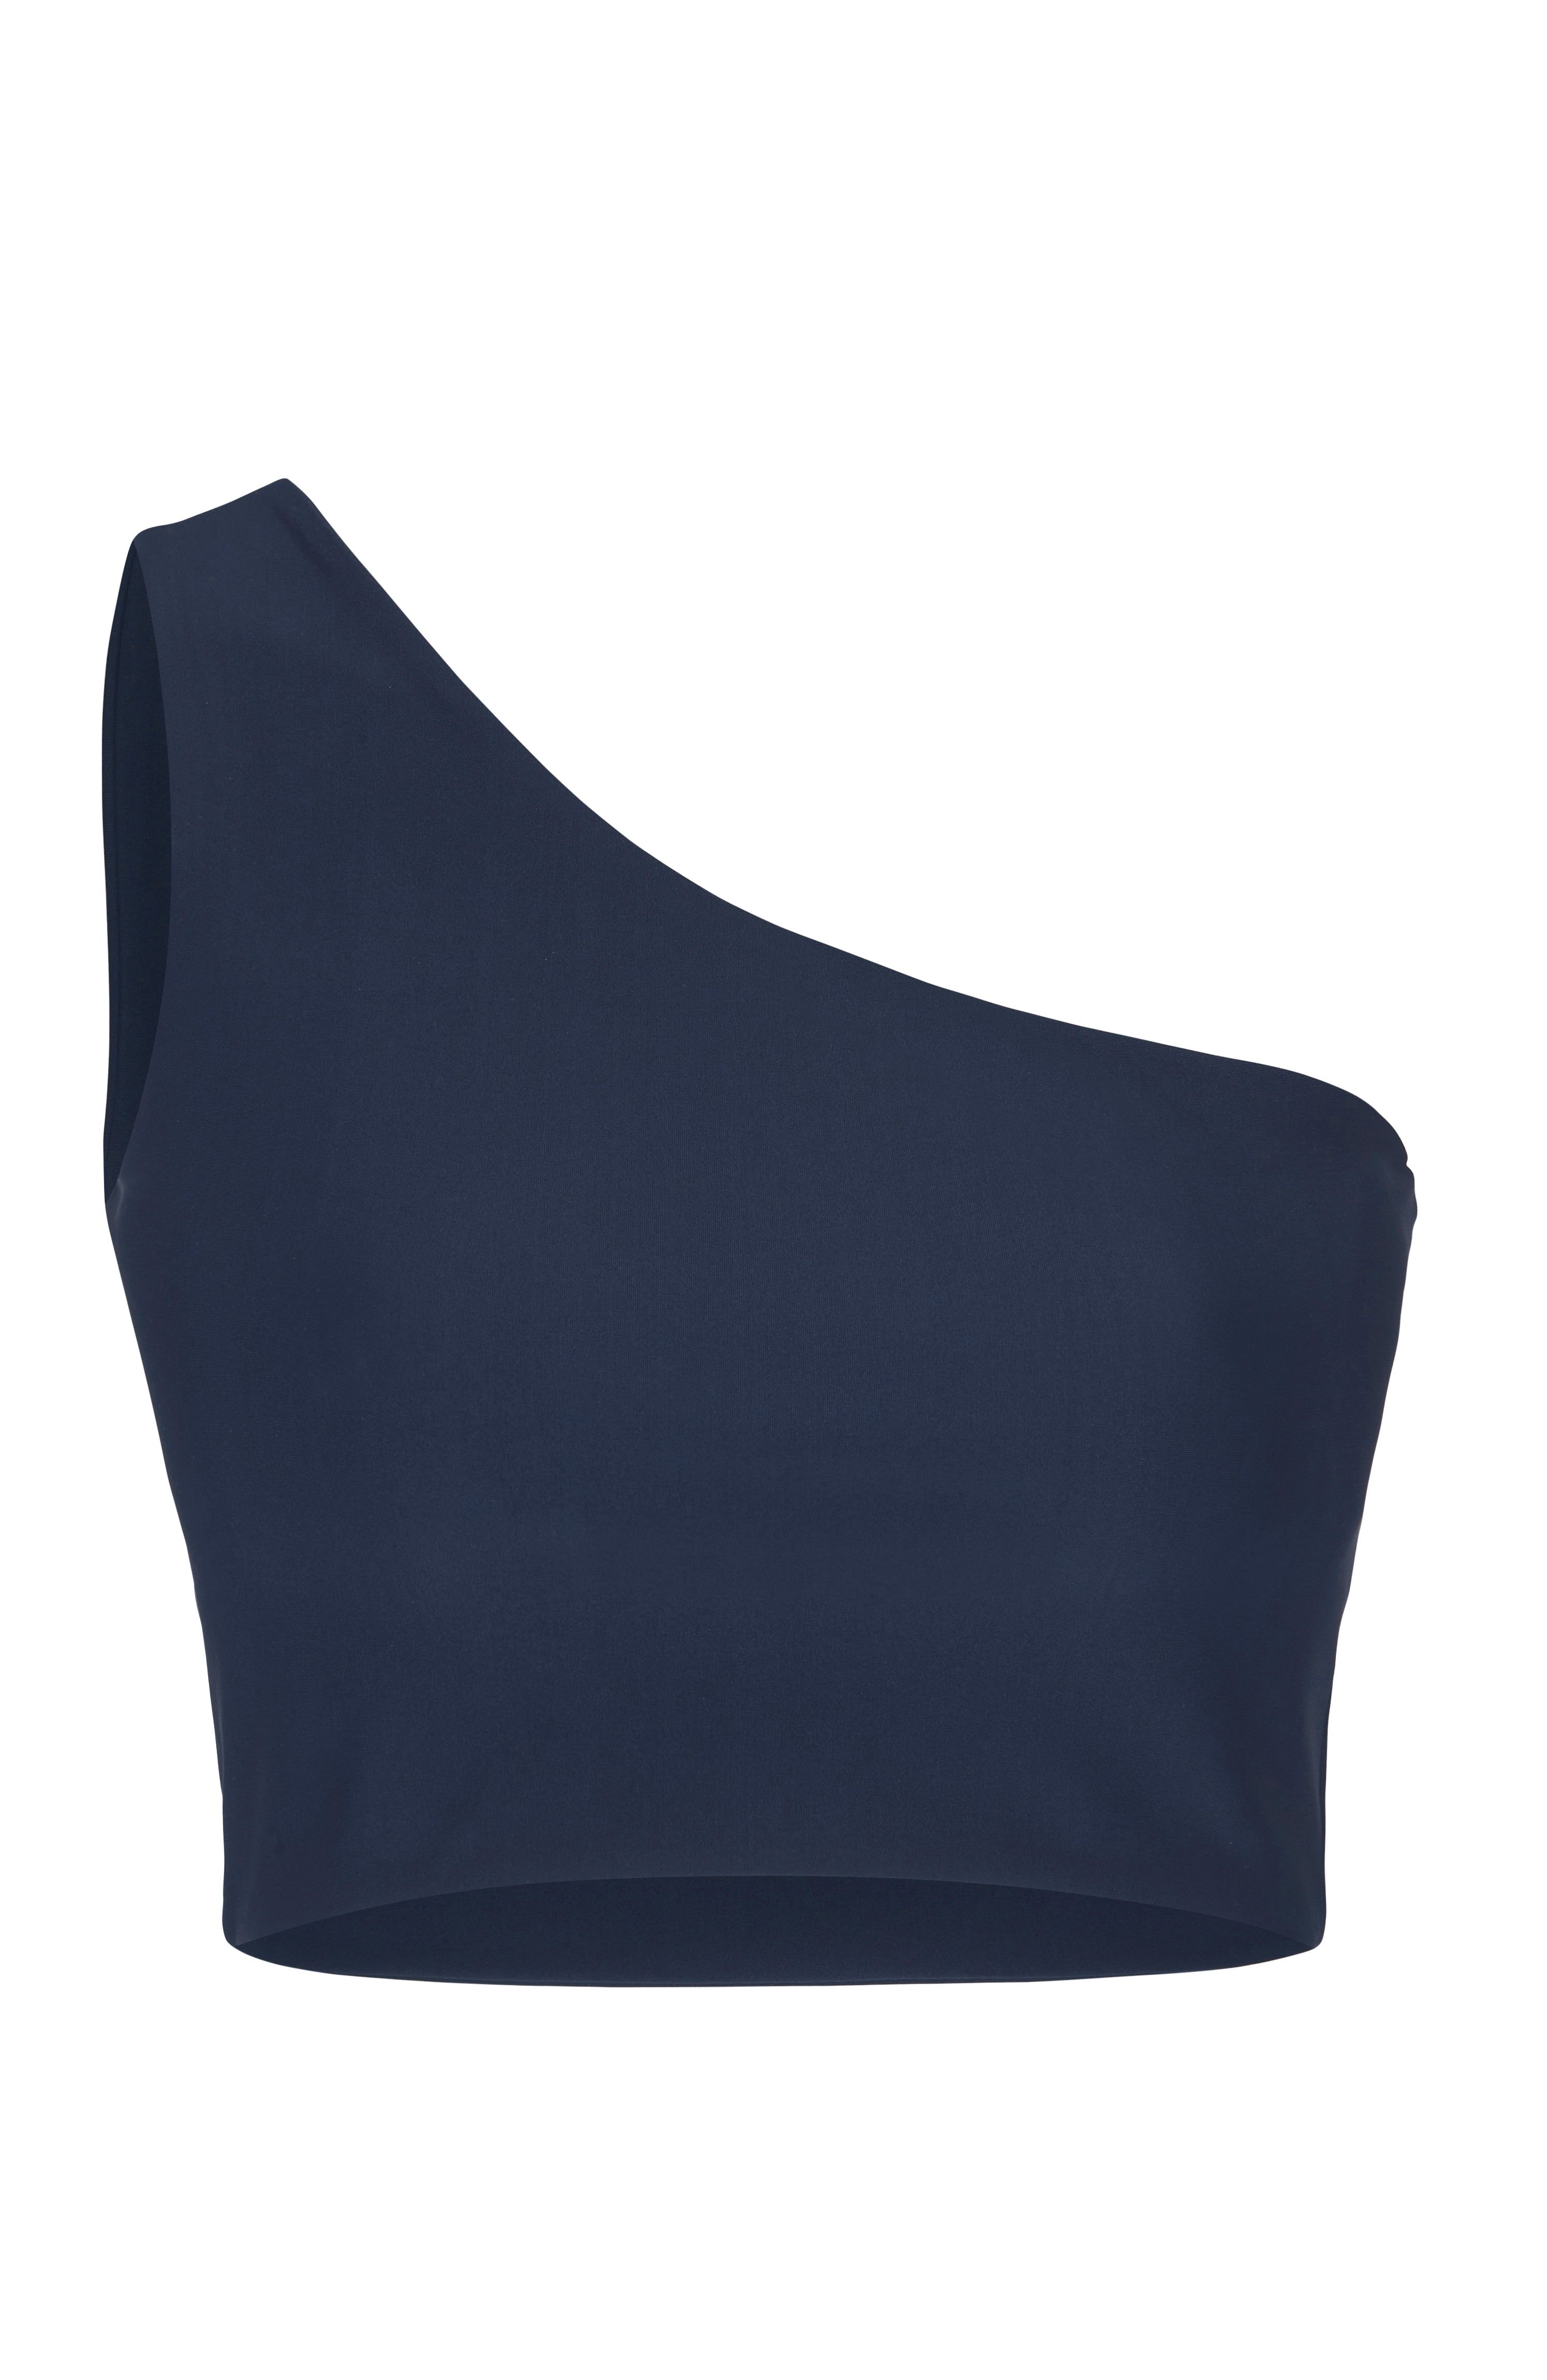  Sisterly Tribe - One Shoulder Top Navy. One Shoulder design, Light to medium support, Buttery Soft & light, matte fabric.